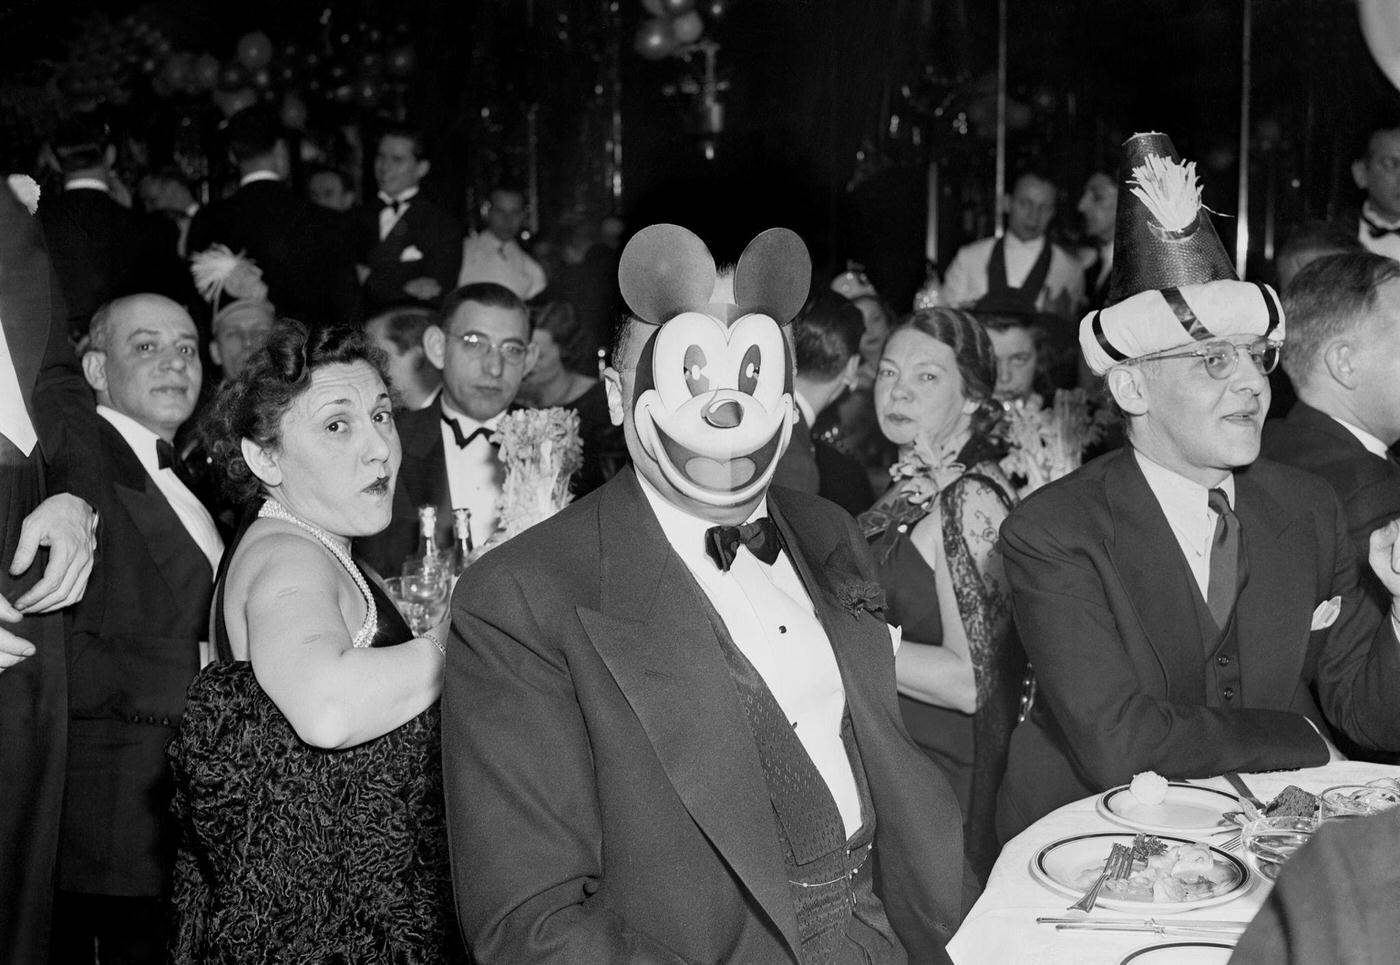 That's J. Edgar Hoover behind the Mickey Mouse mask at a New, 1937